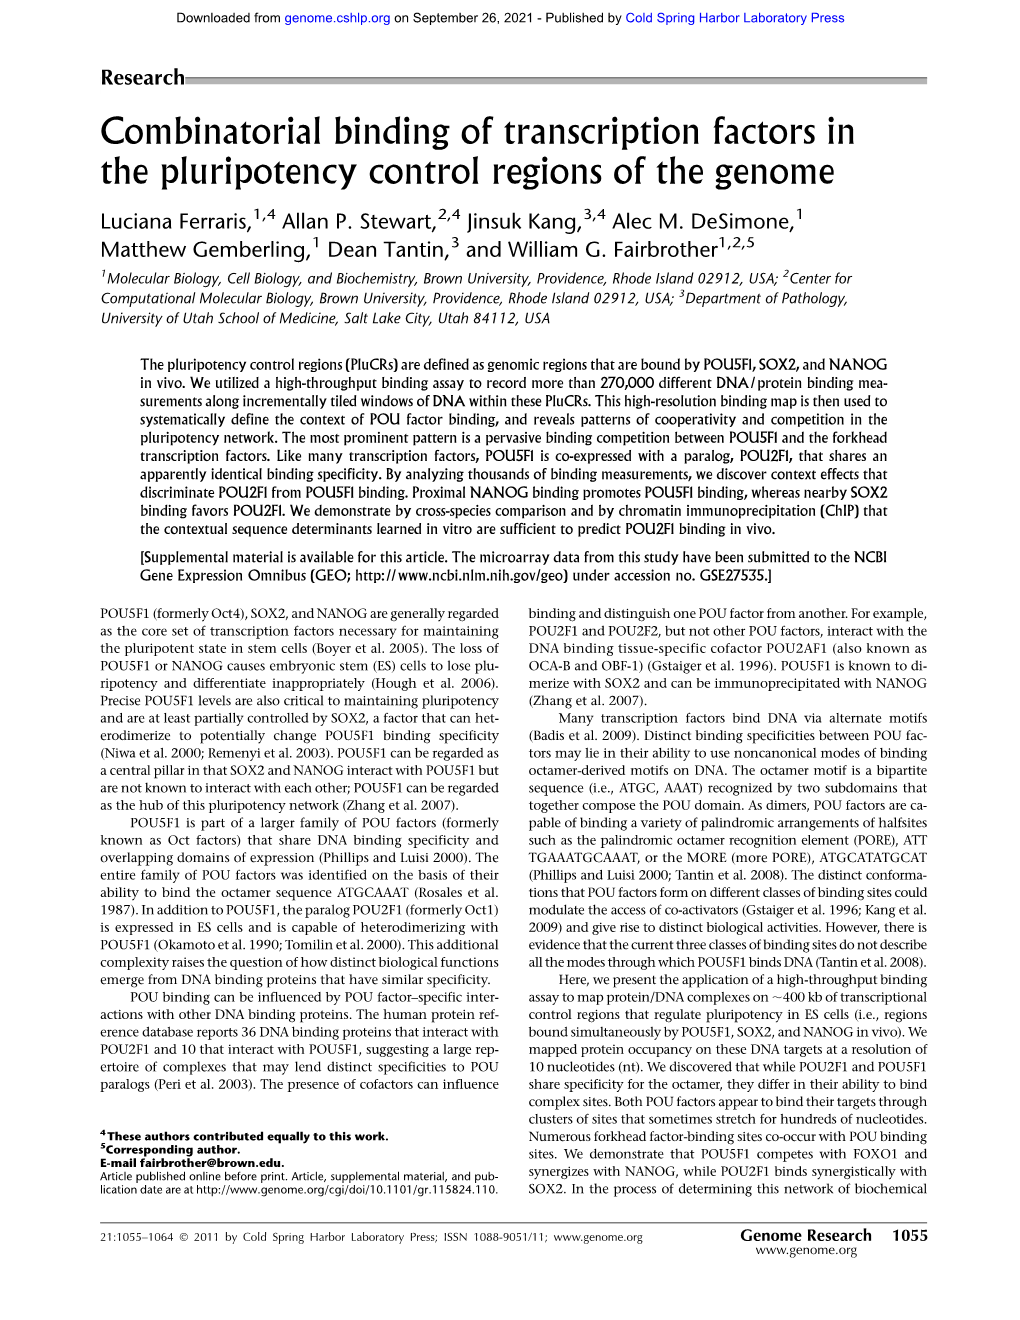 Combinatorial Binding of Transcription Factors in the Pluripotency Control Regions of the Genome